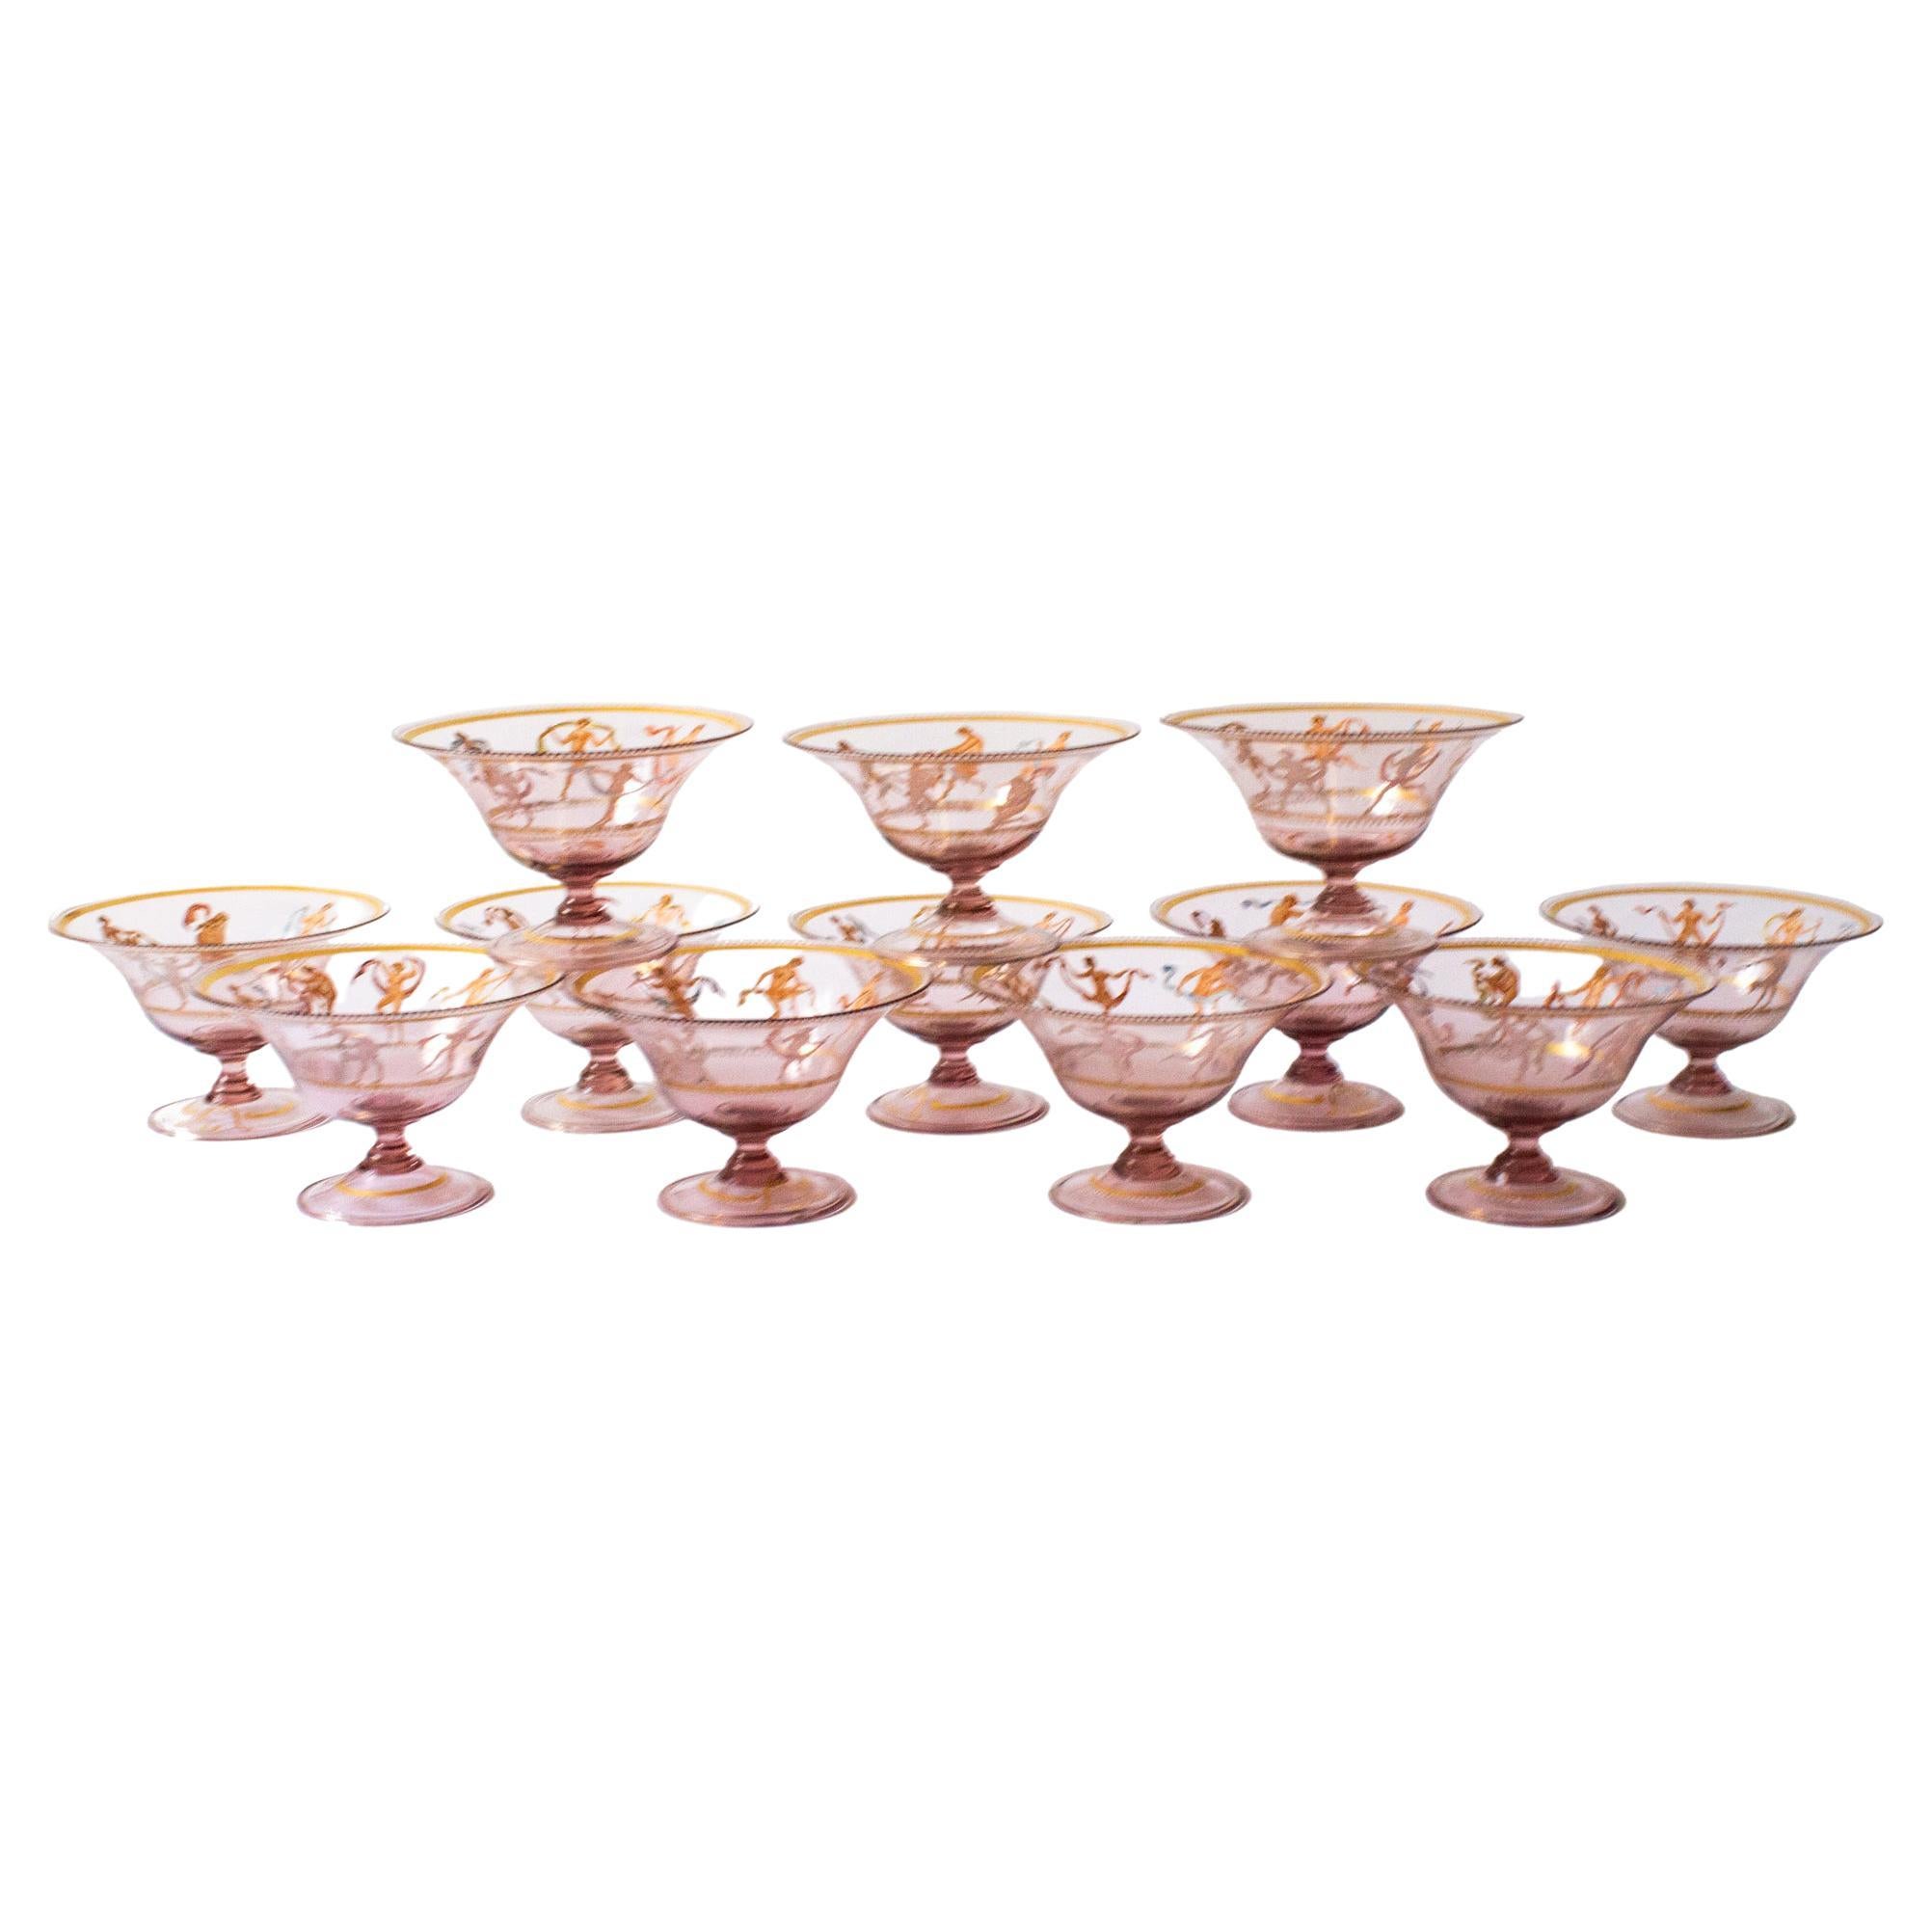 12 Art Deco Enameled Venetian Amethyst Coupe Glasses with Dancing Nude Ladies For Sale